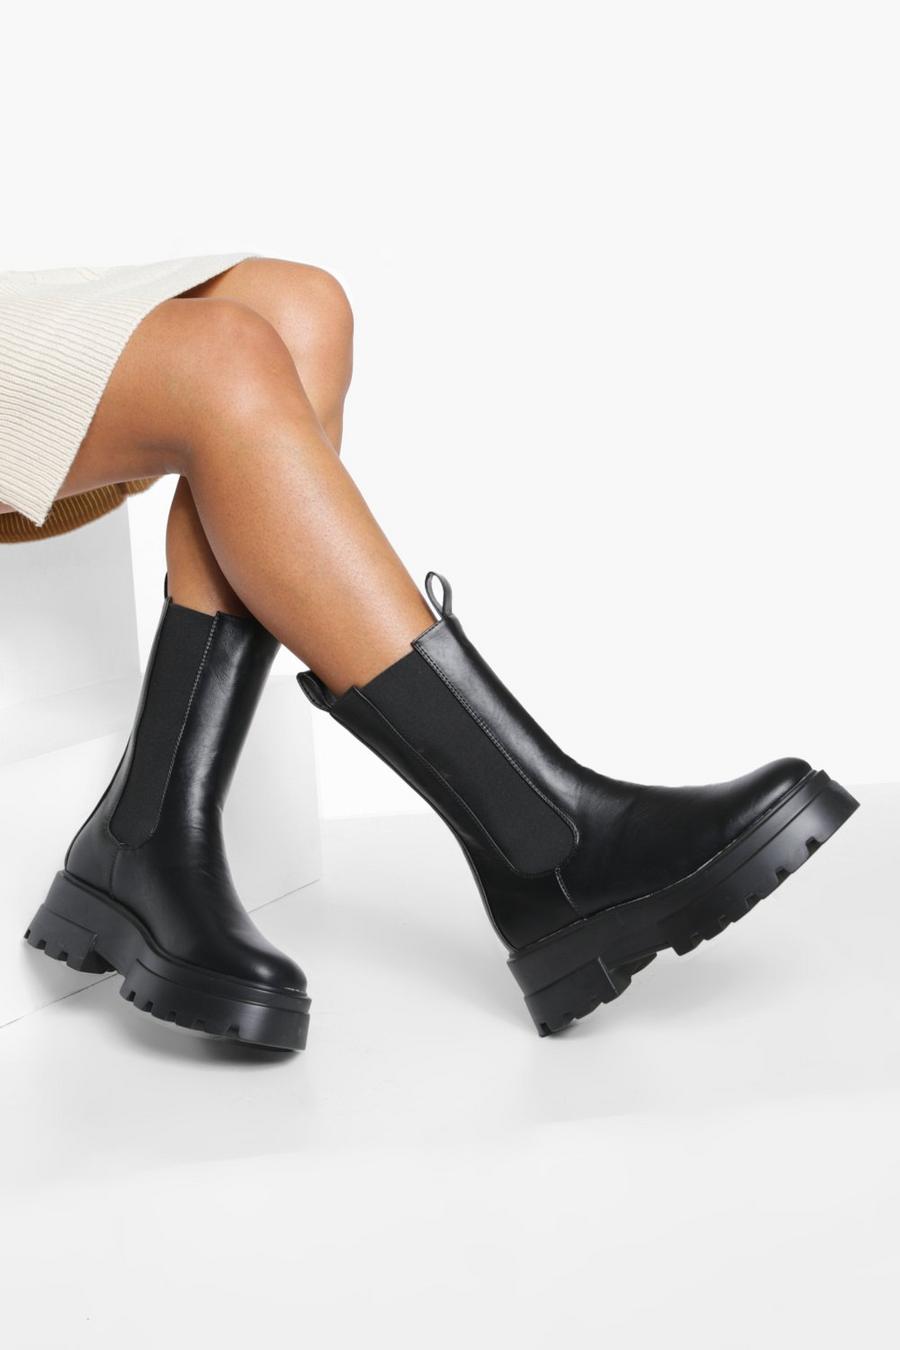 Black Wide Fit Cleated Sole Calf High Chelsea Boots